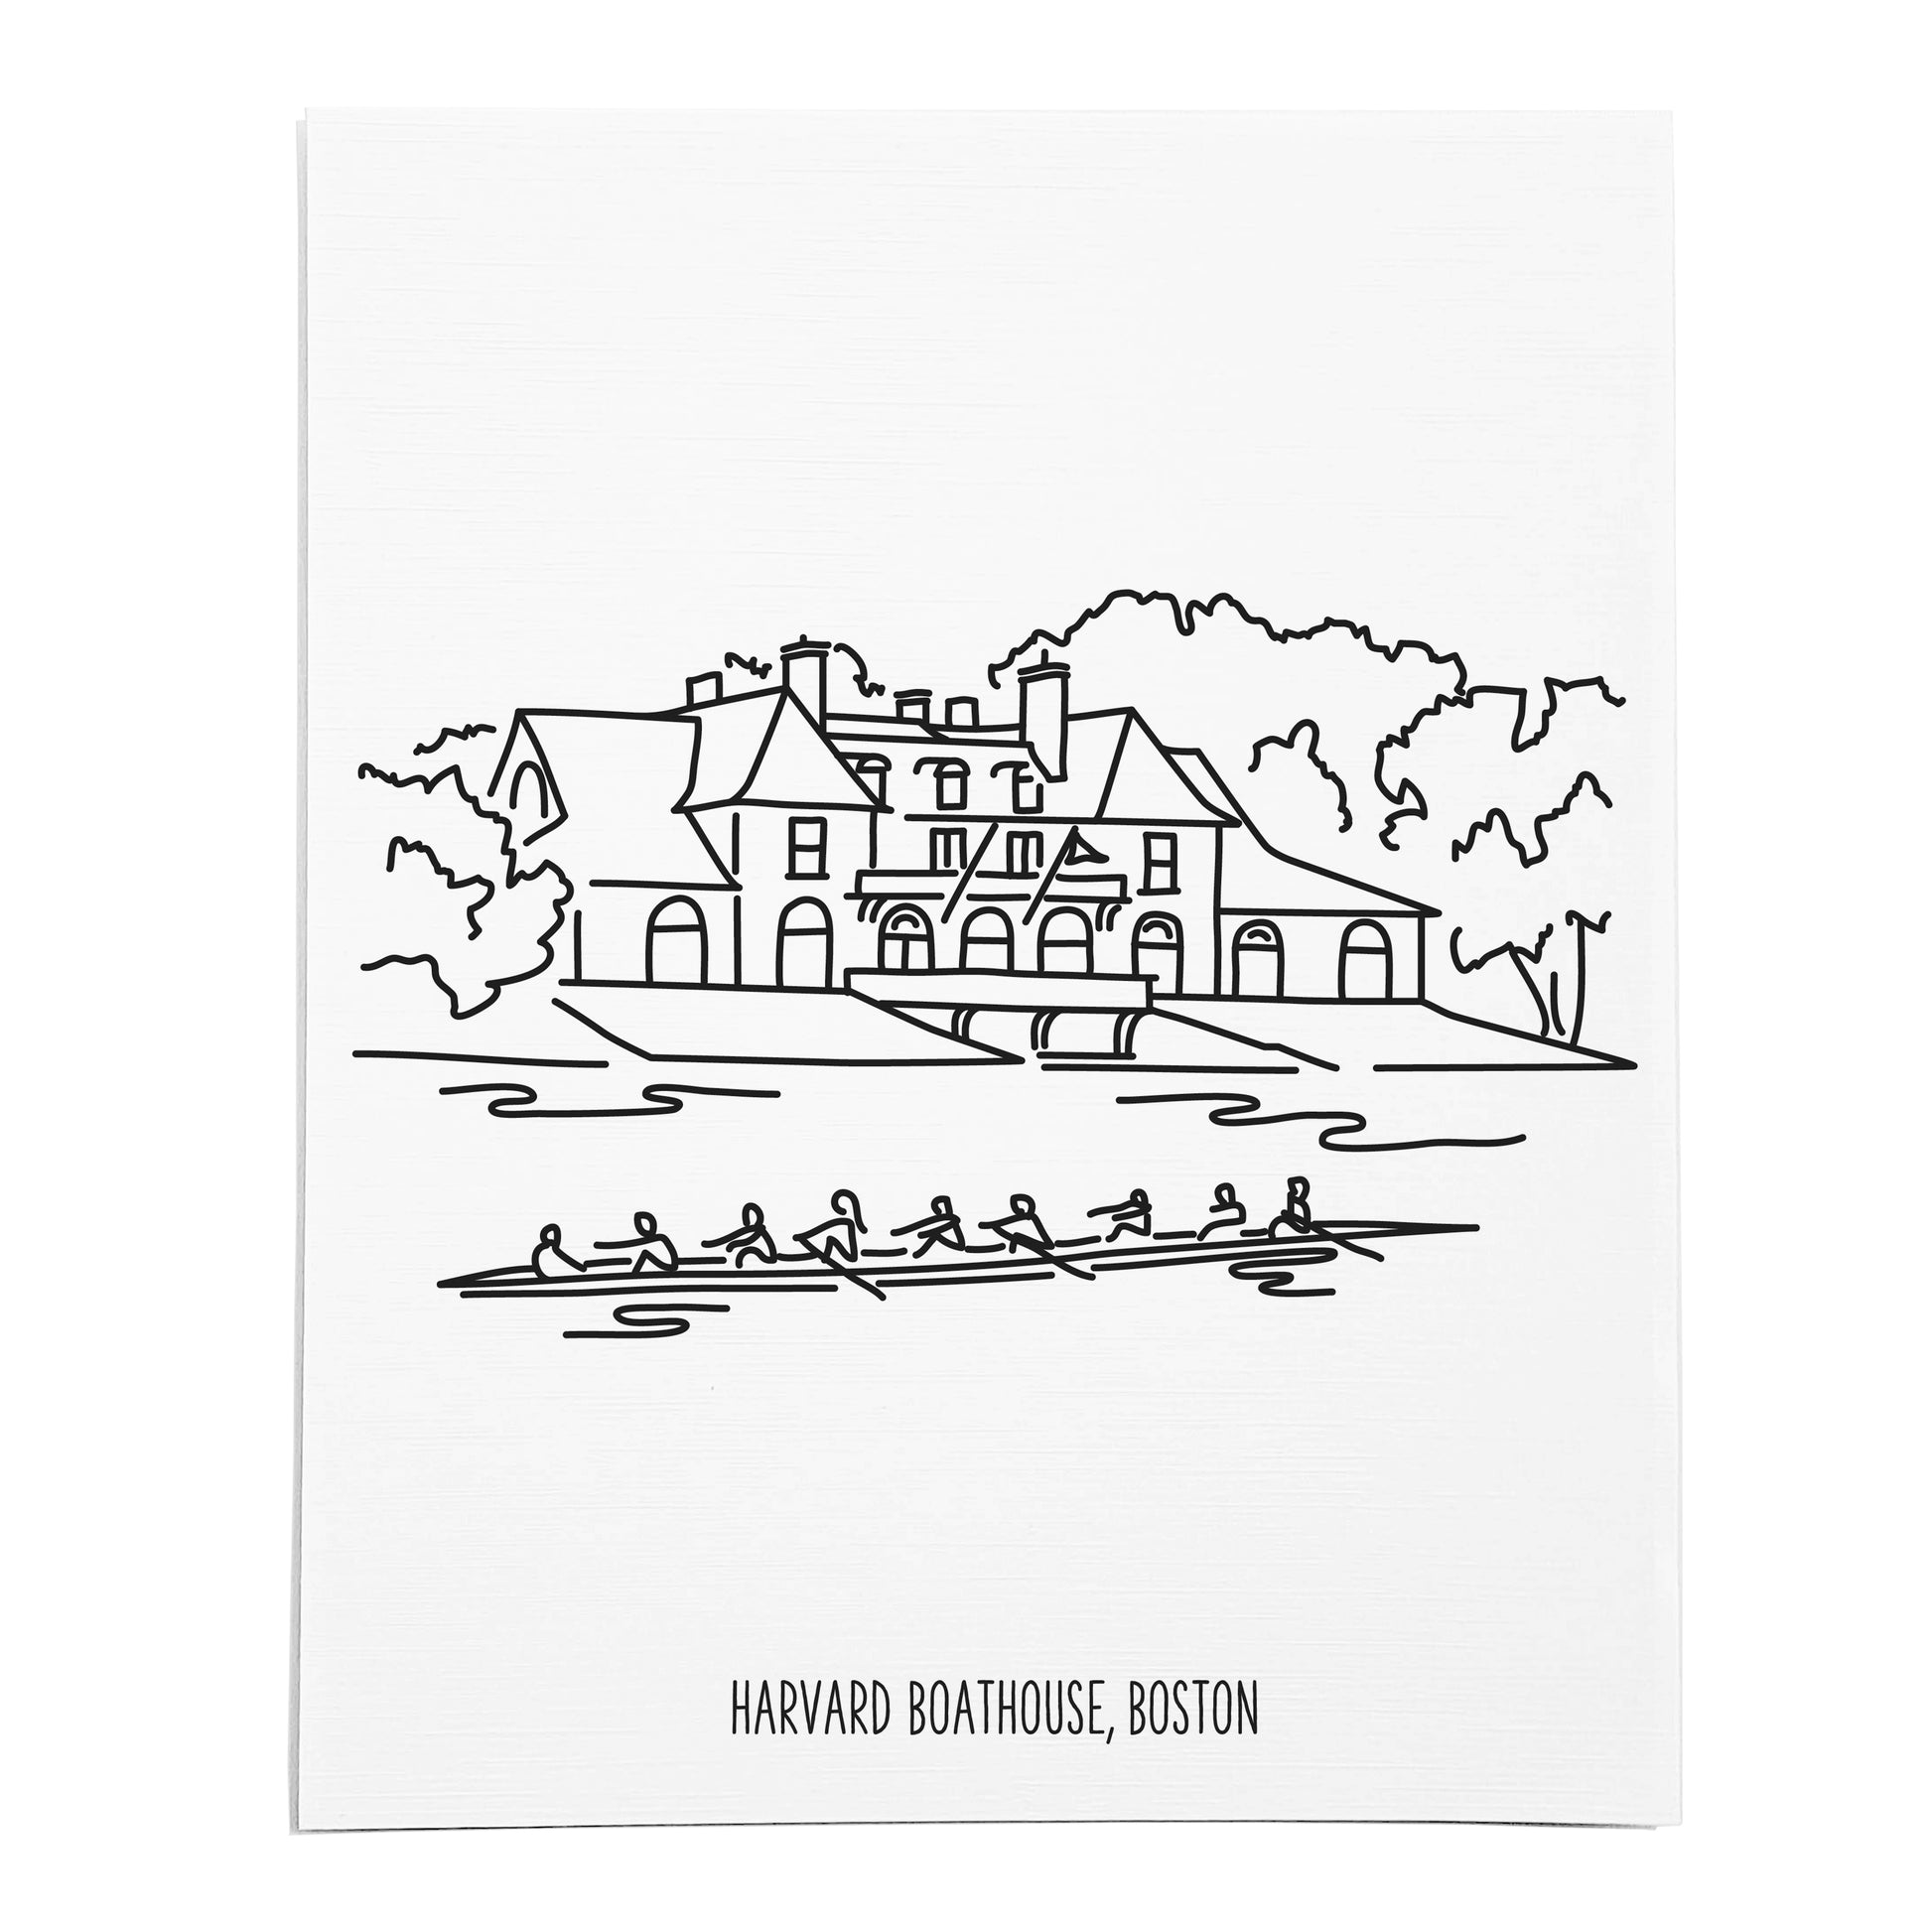 An art print featuring a line drawing of the Harvard Boathouse on white linen paper